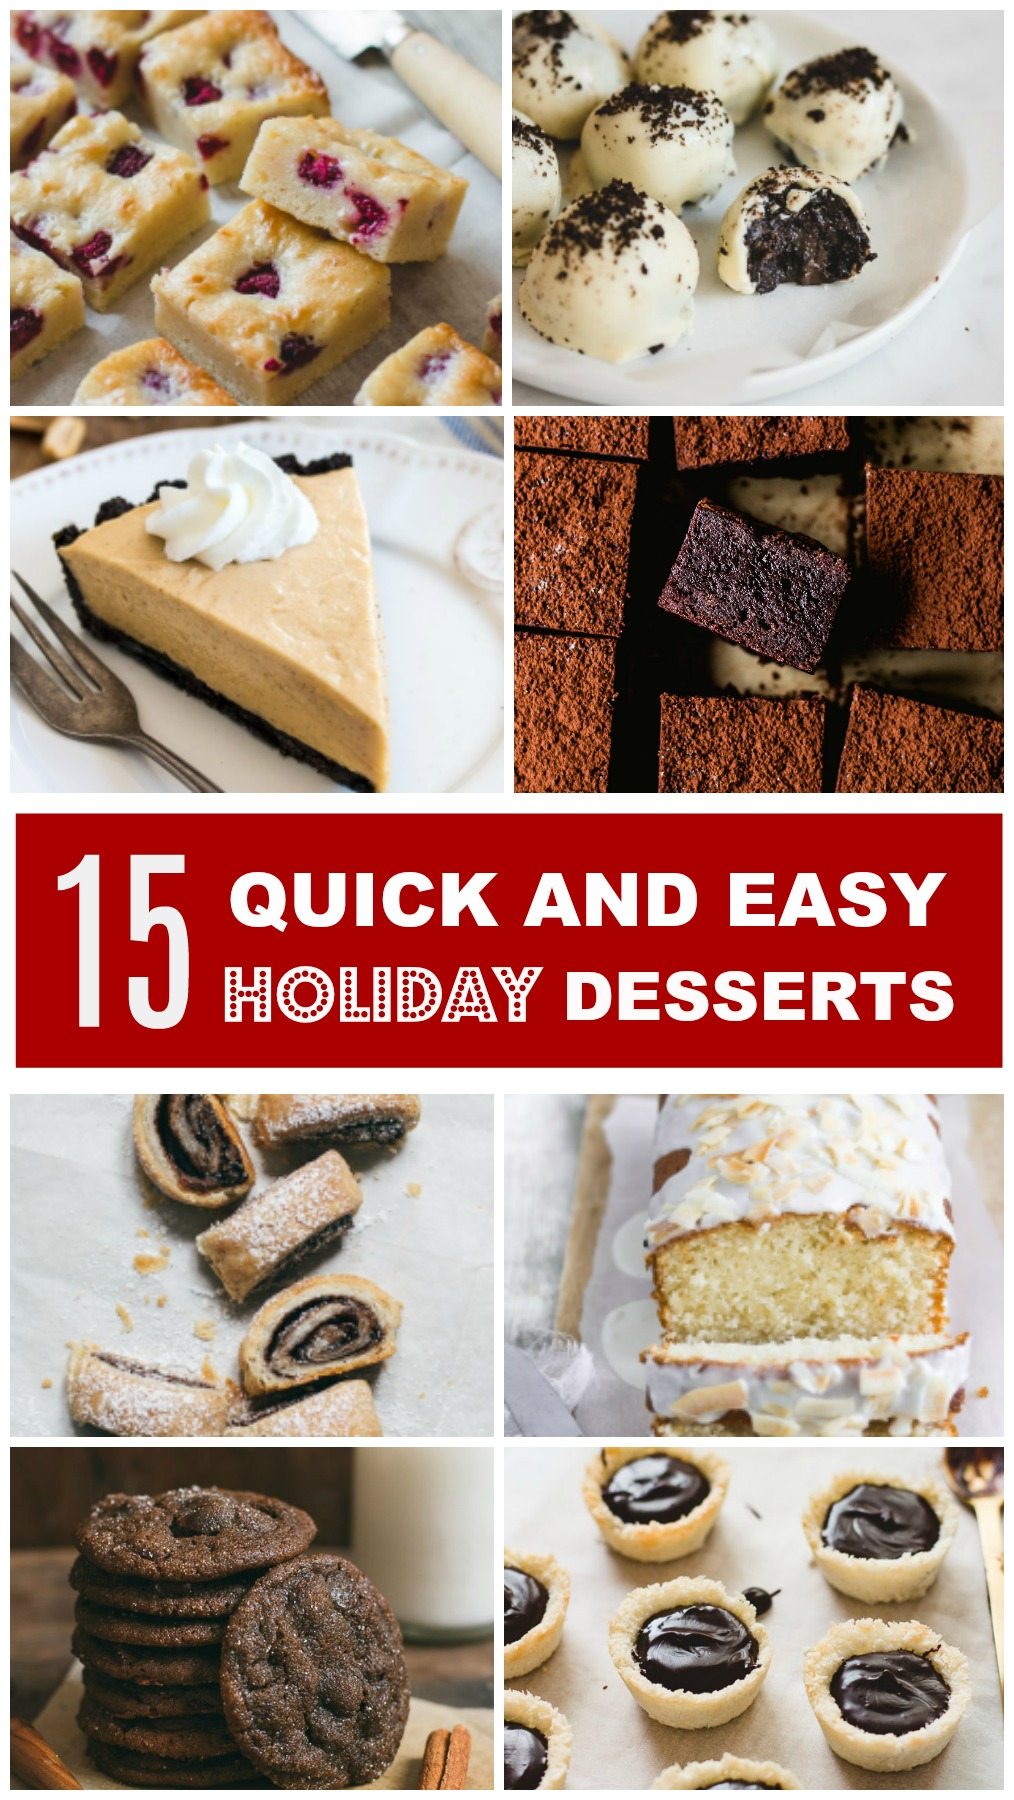 Quick and Easy Holiday Desserts